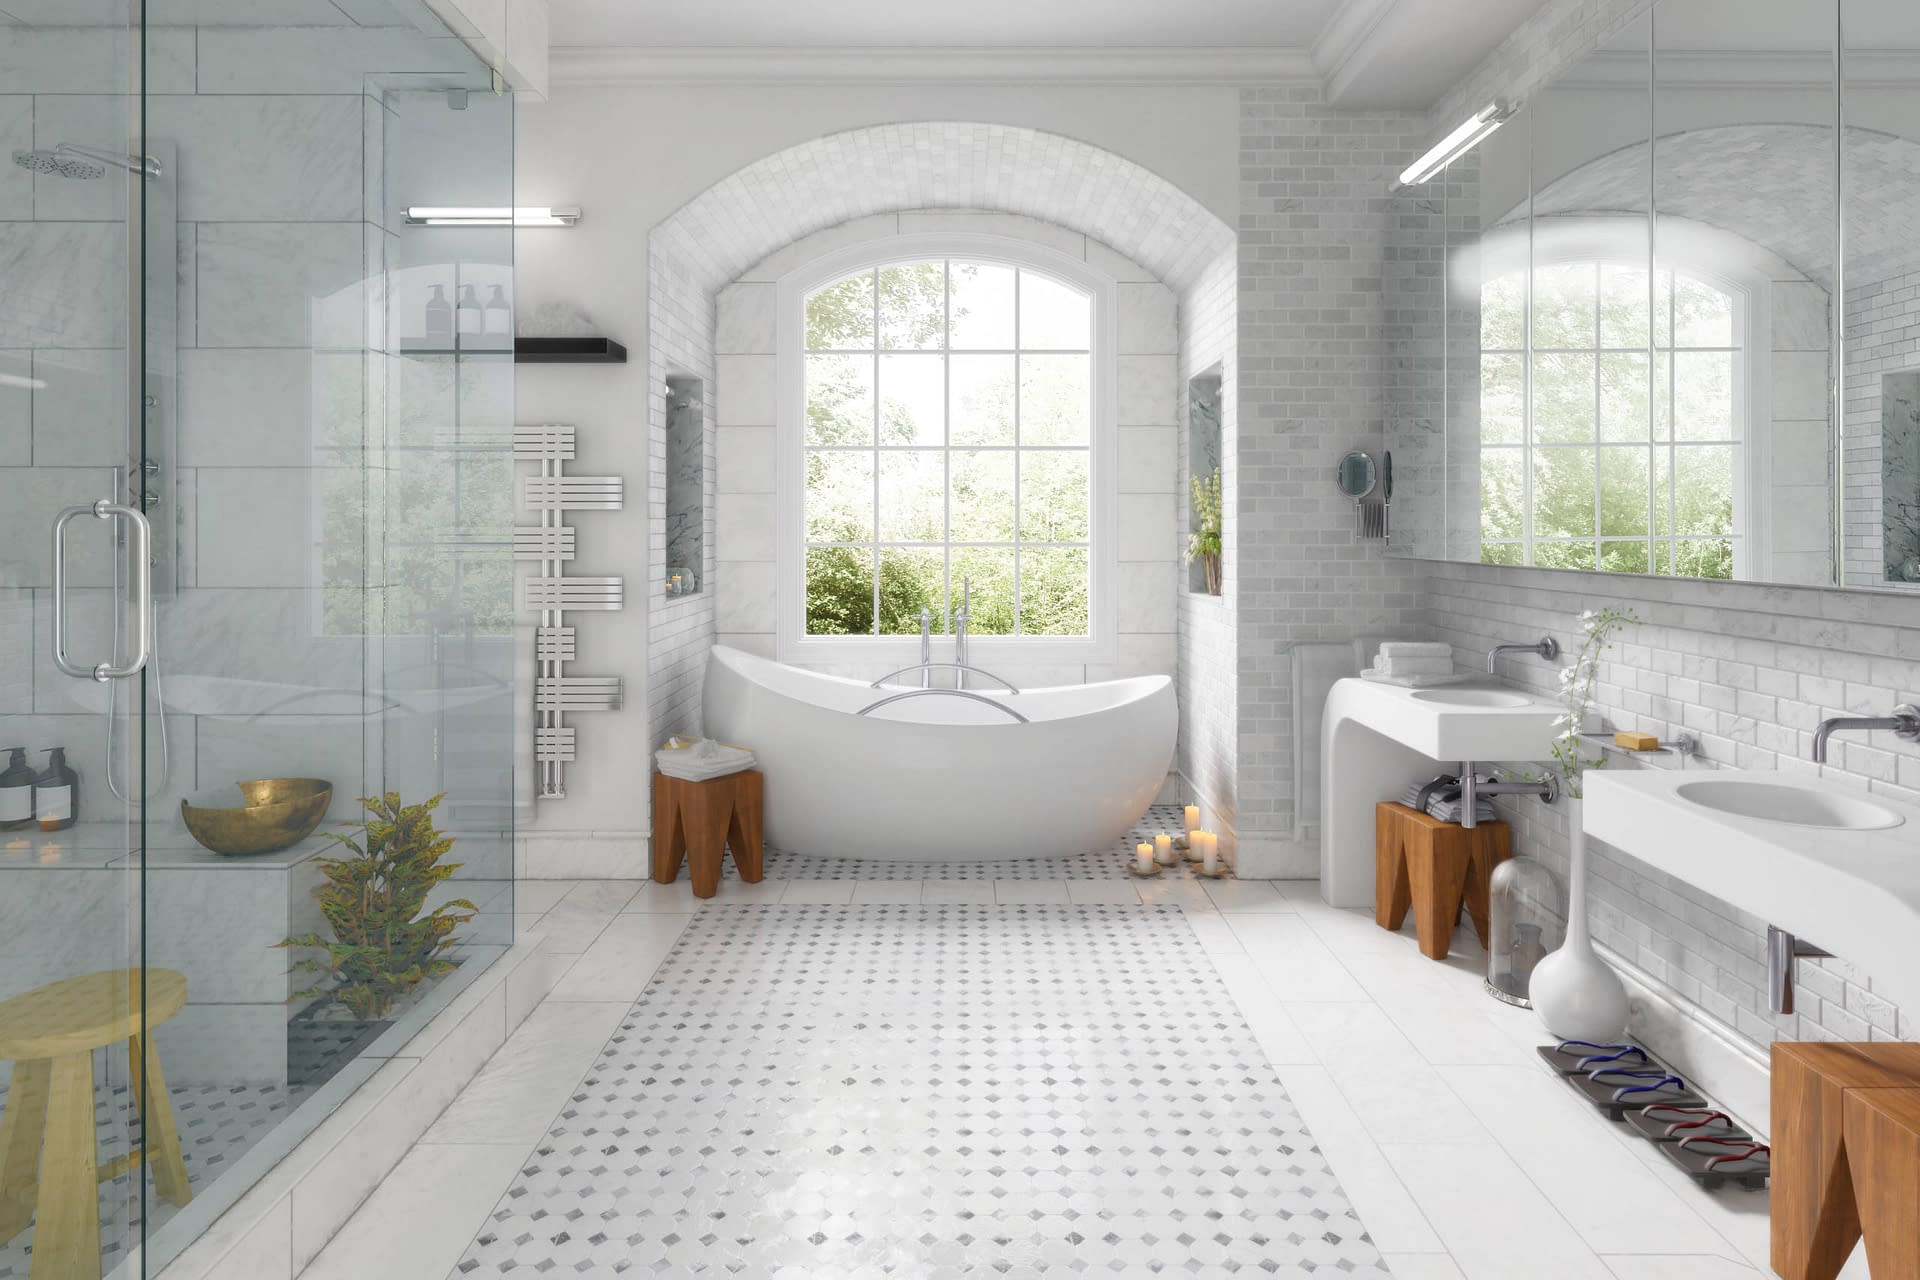 Renovation of an old building bathroom - 3d visualization